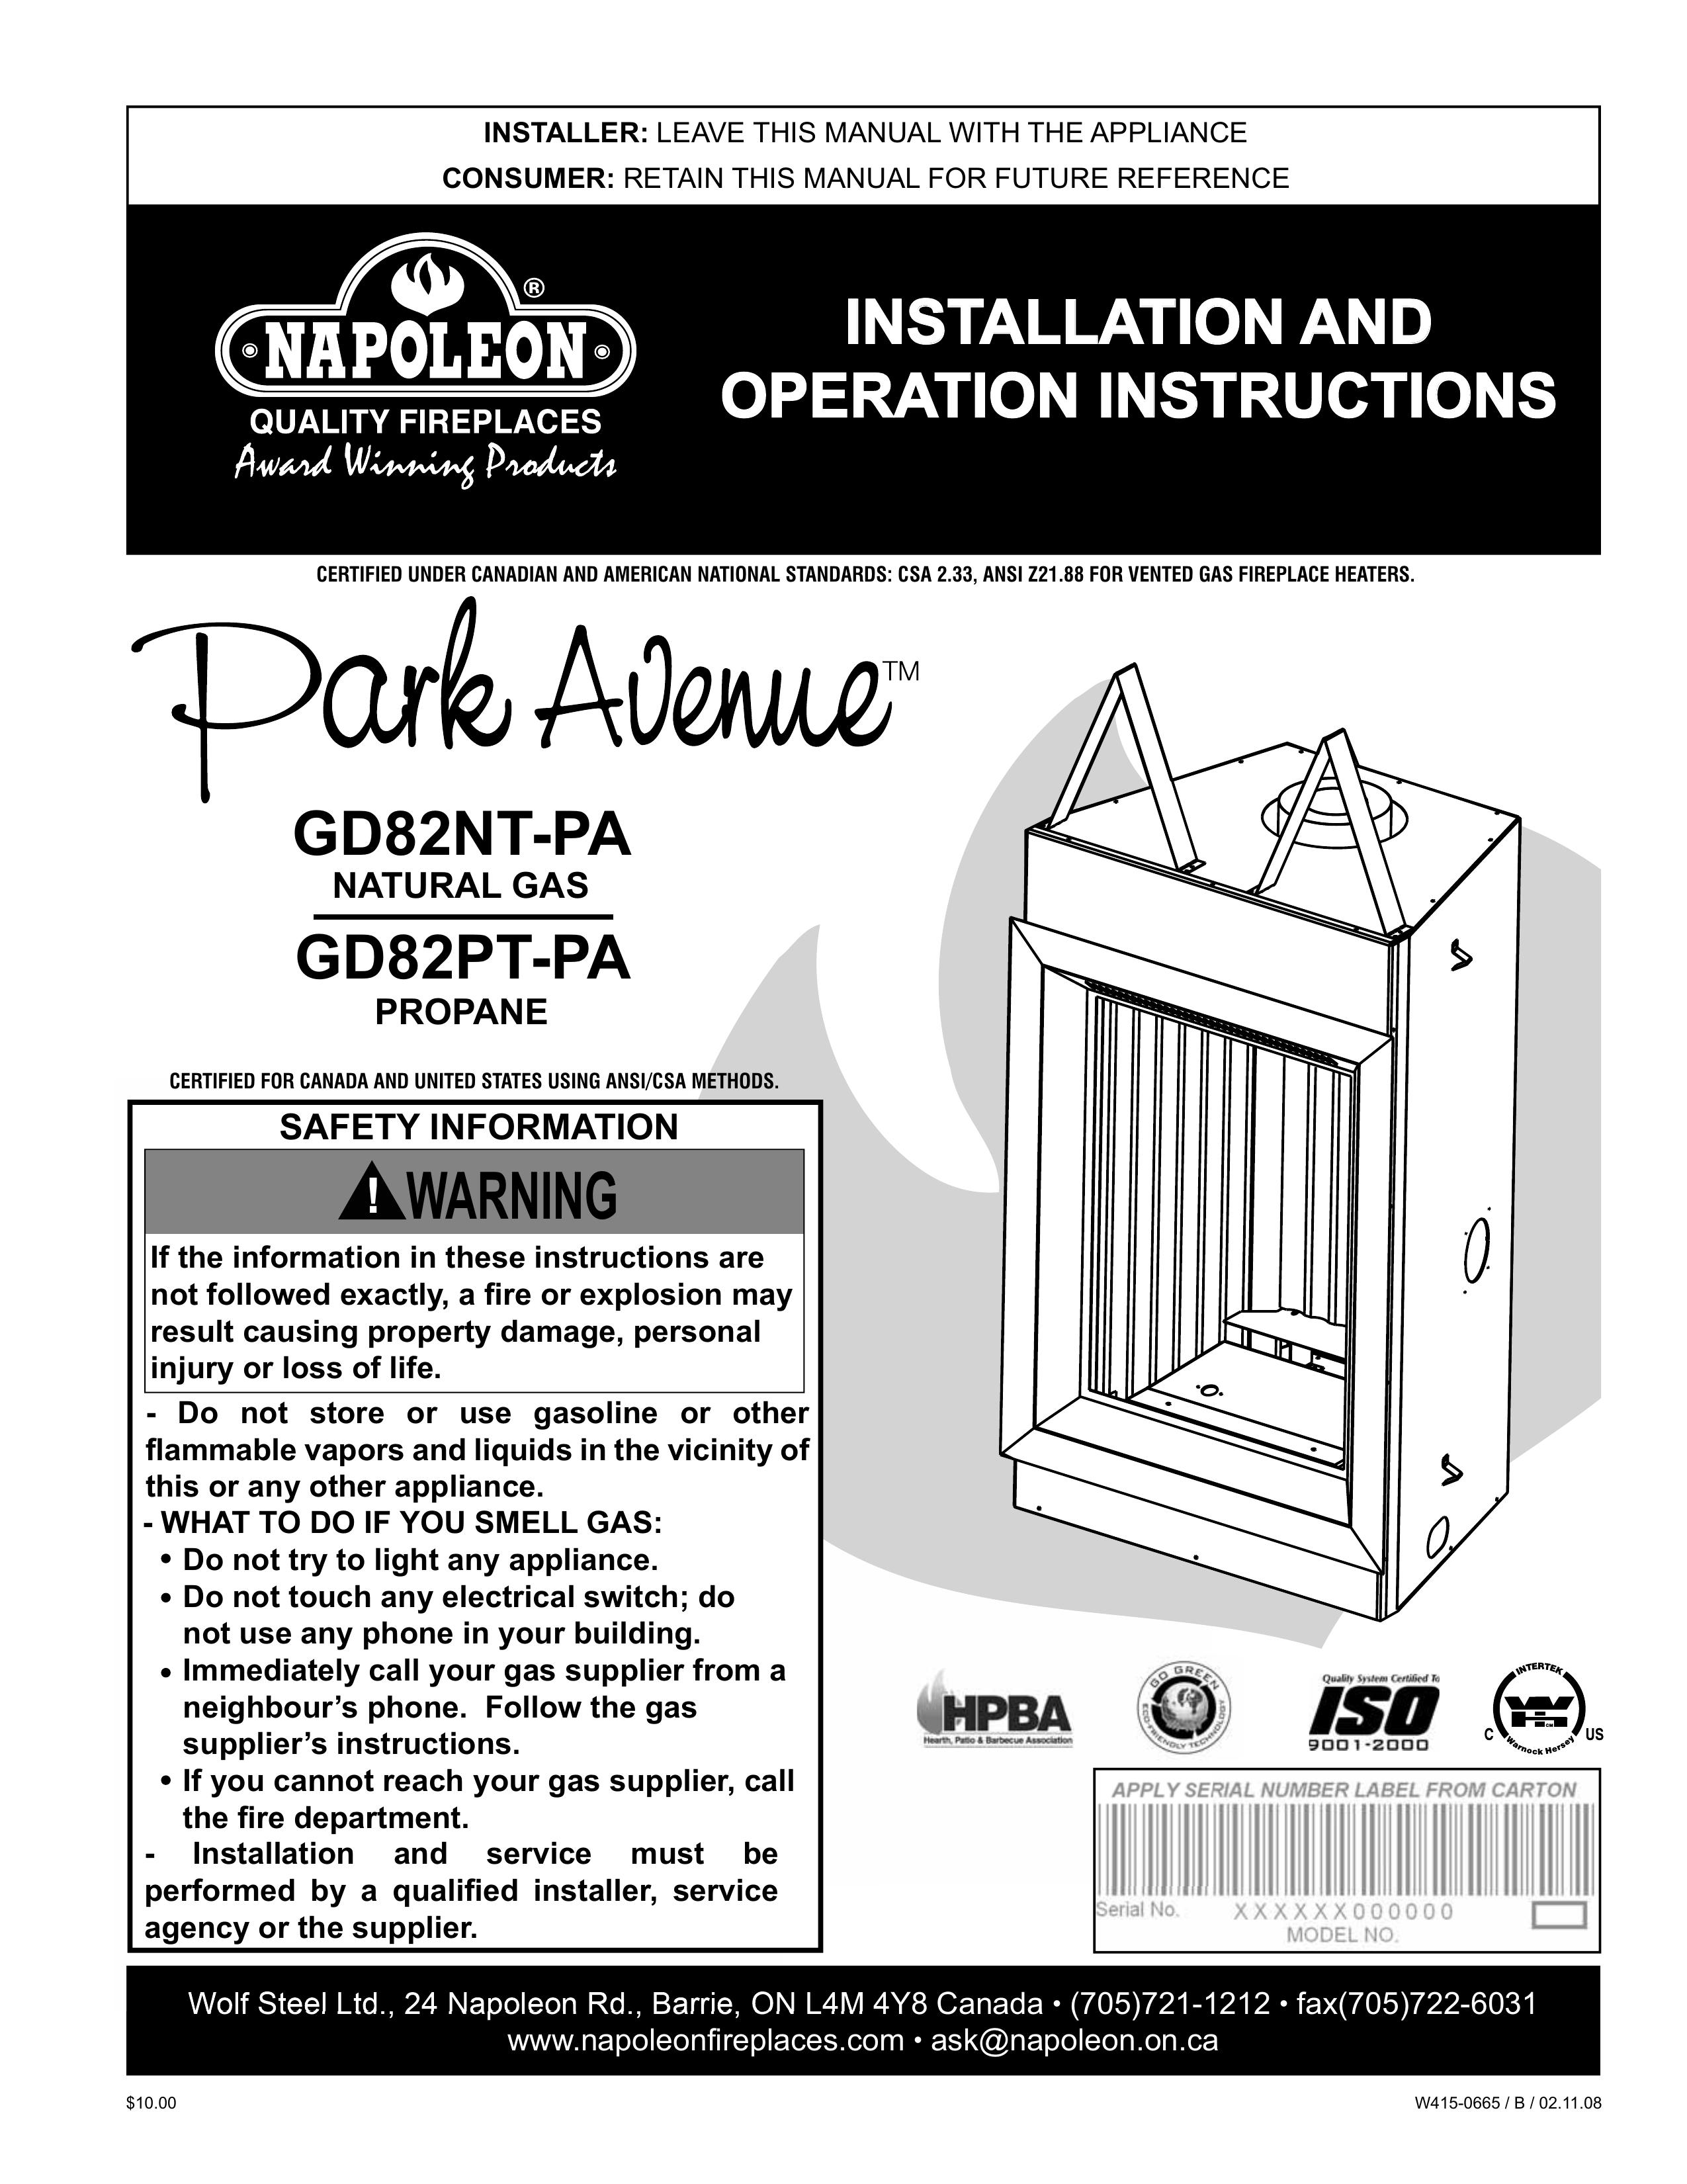 Napoleon Fireplaces GD82PT-PA Fire Pit User Manual